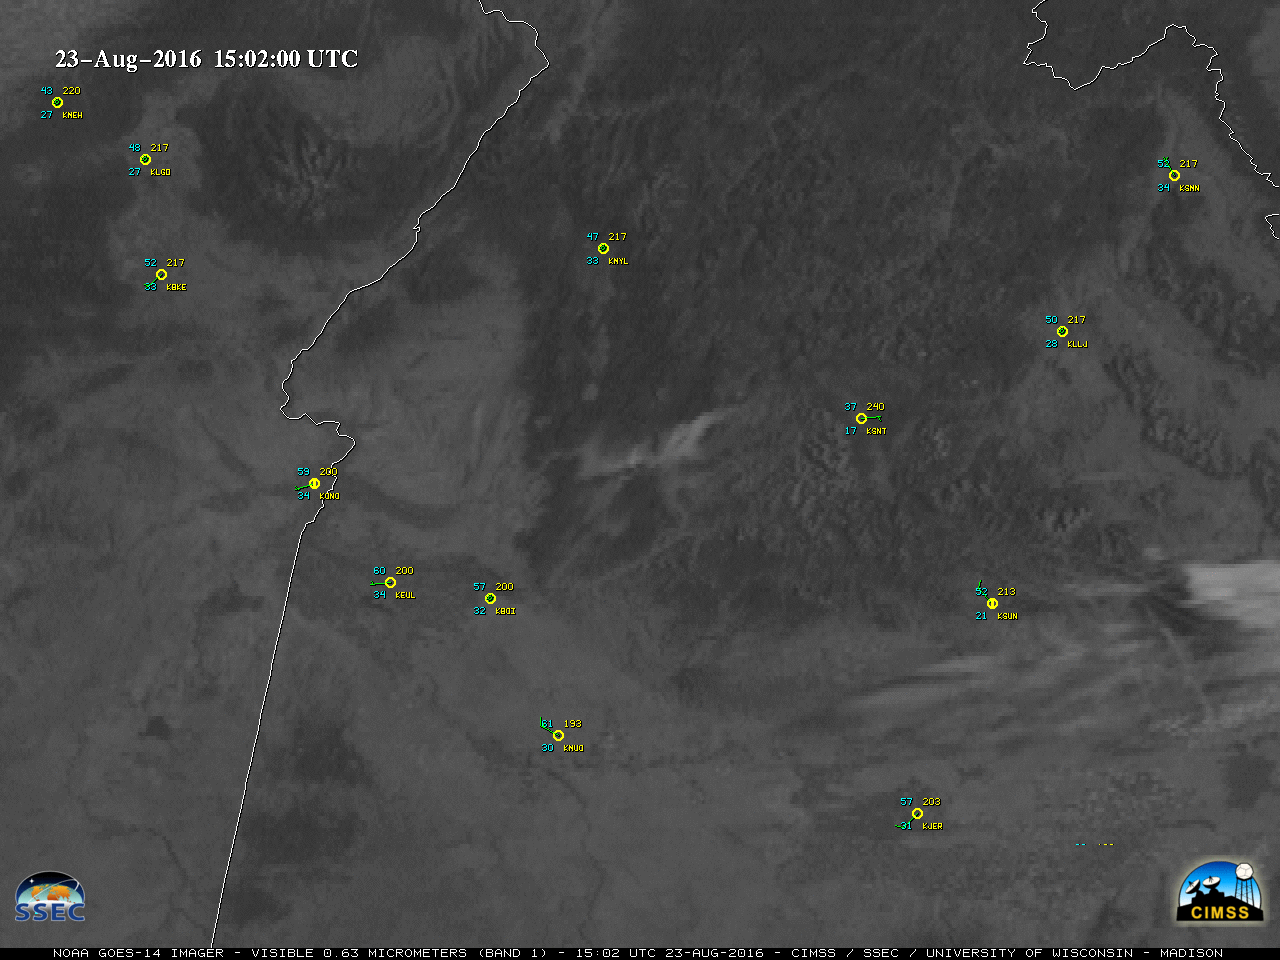 GOES-14 Visible (0.63 um) images, with plots of hourly surface reports [click to play MP4 animation]